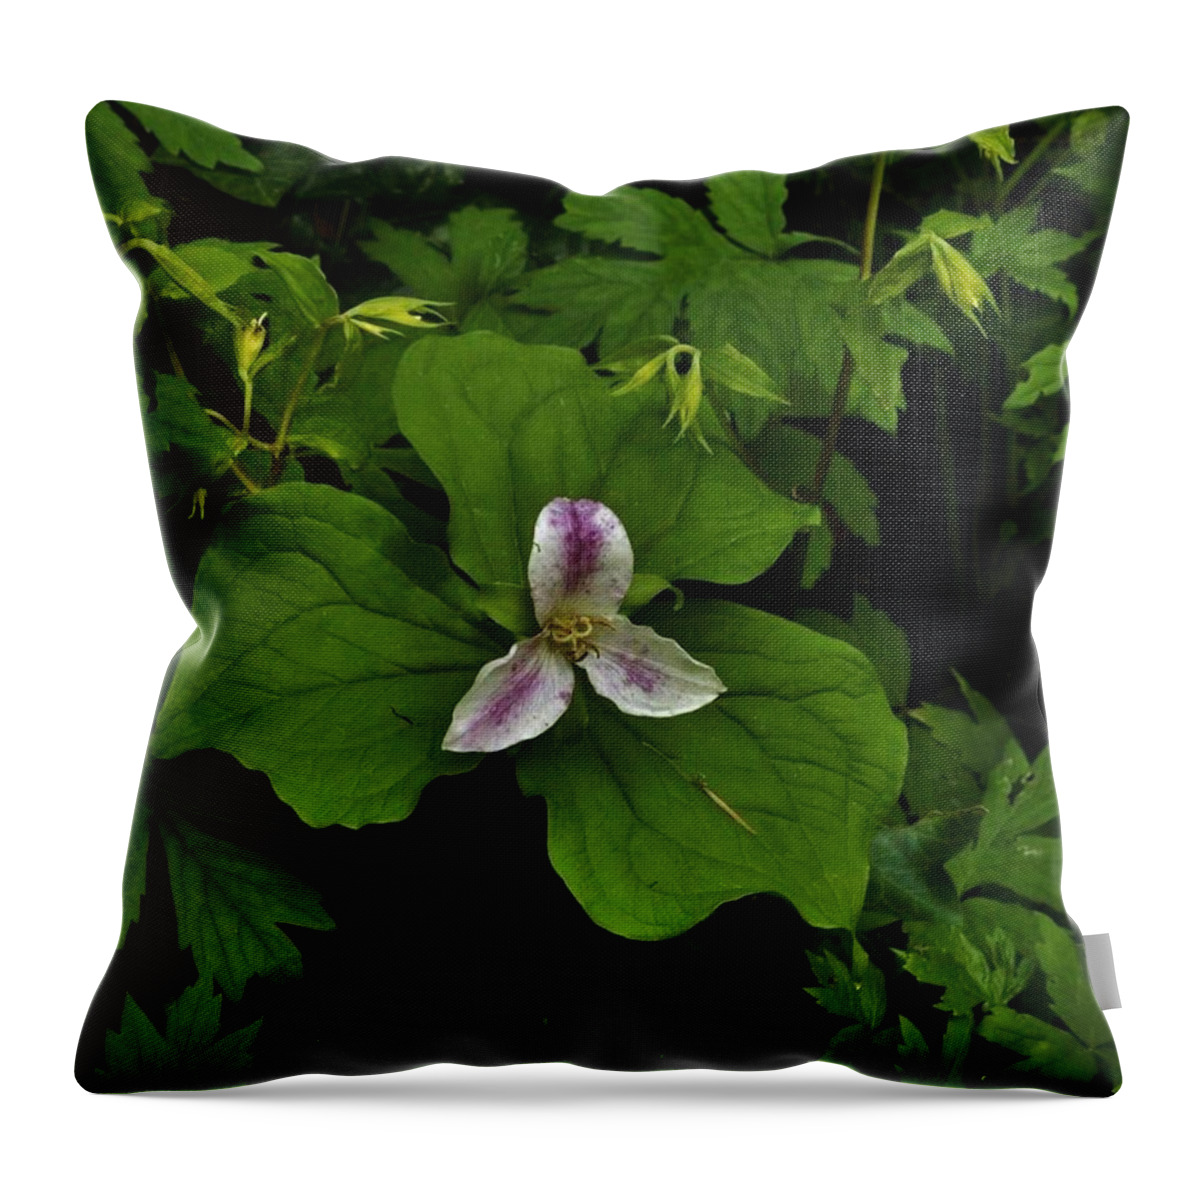 Flowers Throw Pillow featuring the photograph The Quite Forest by Charles Lucas